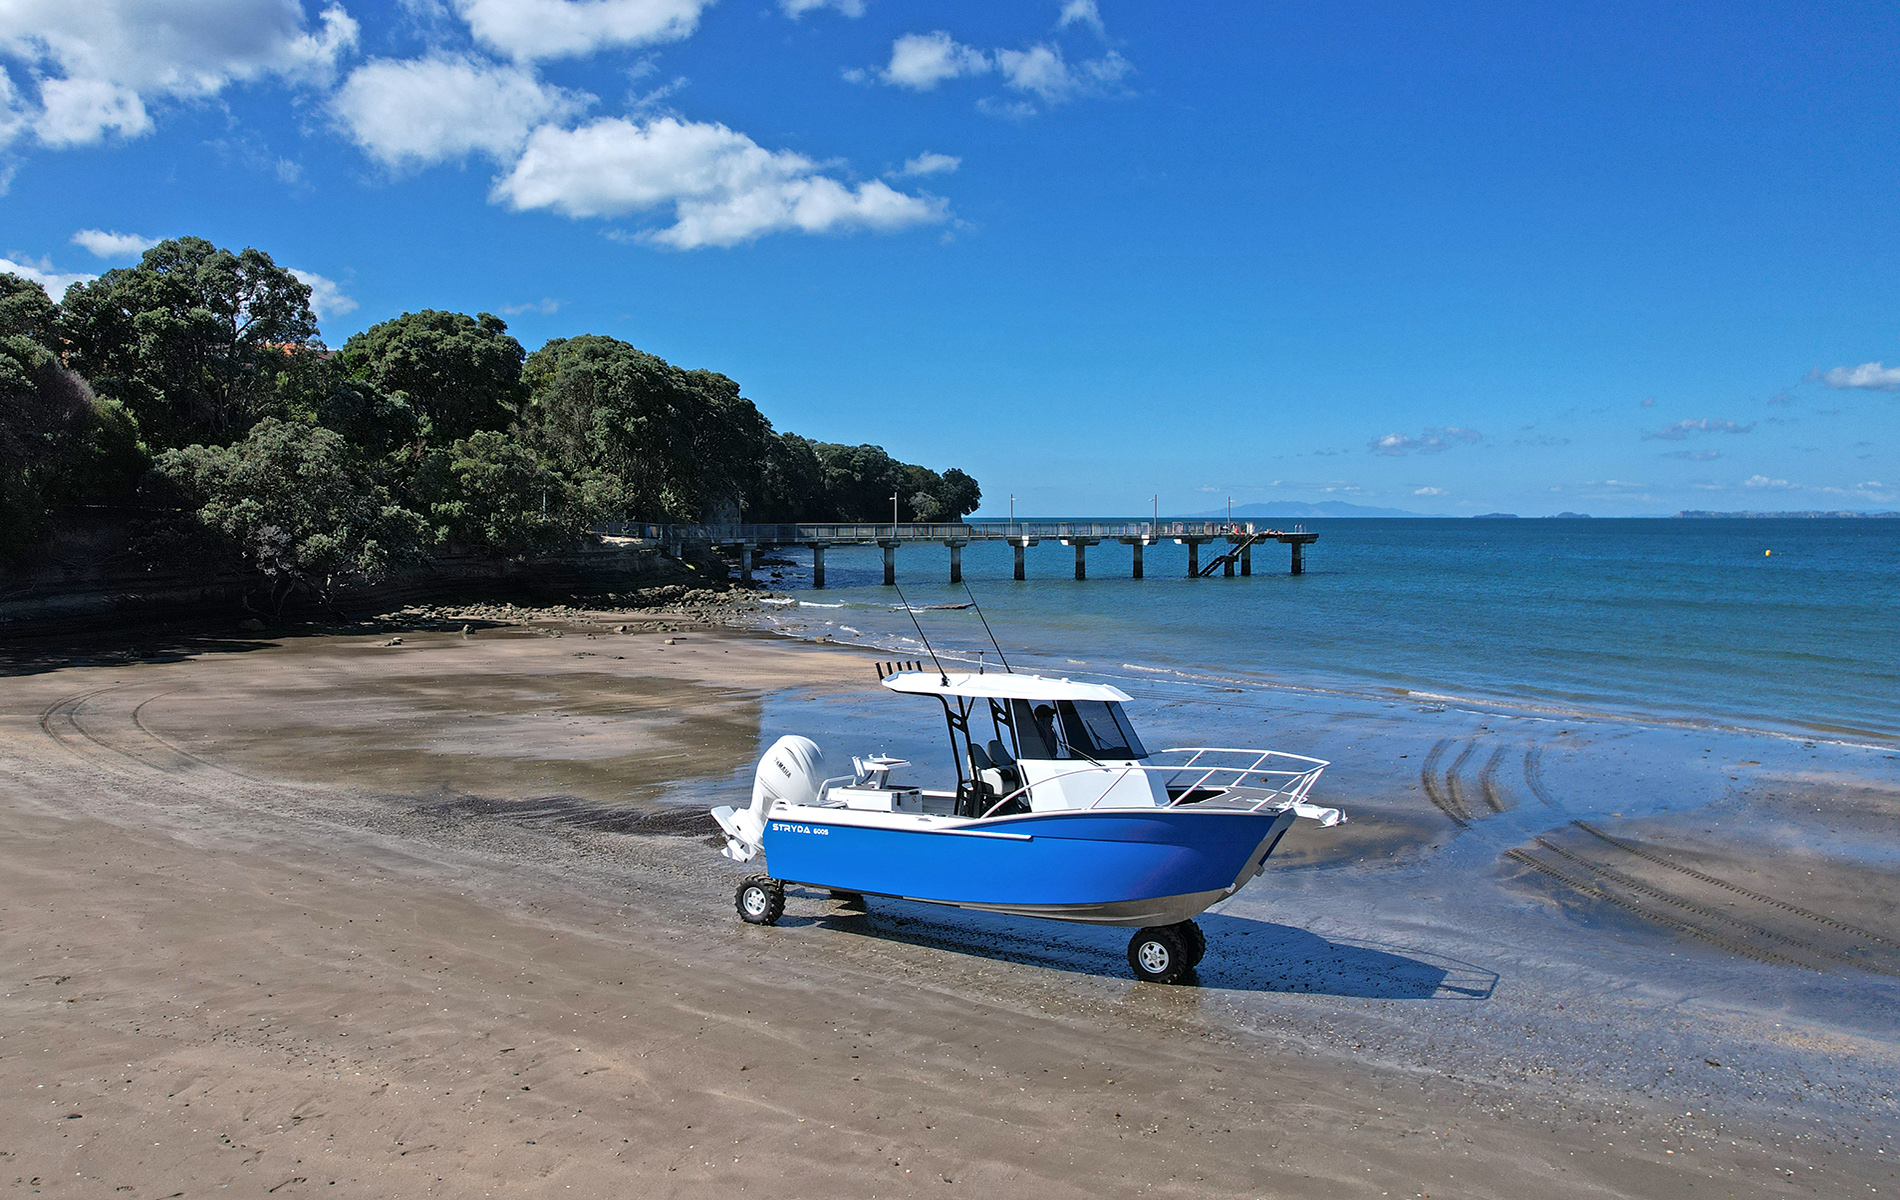 600S parked on beach at Murrarys Bay